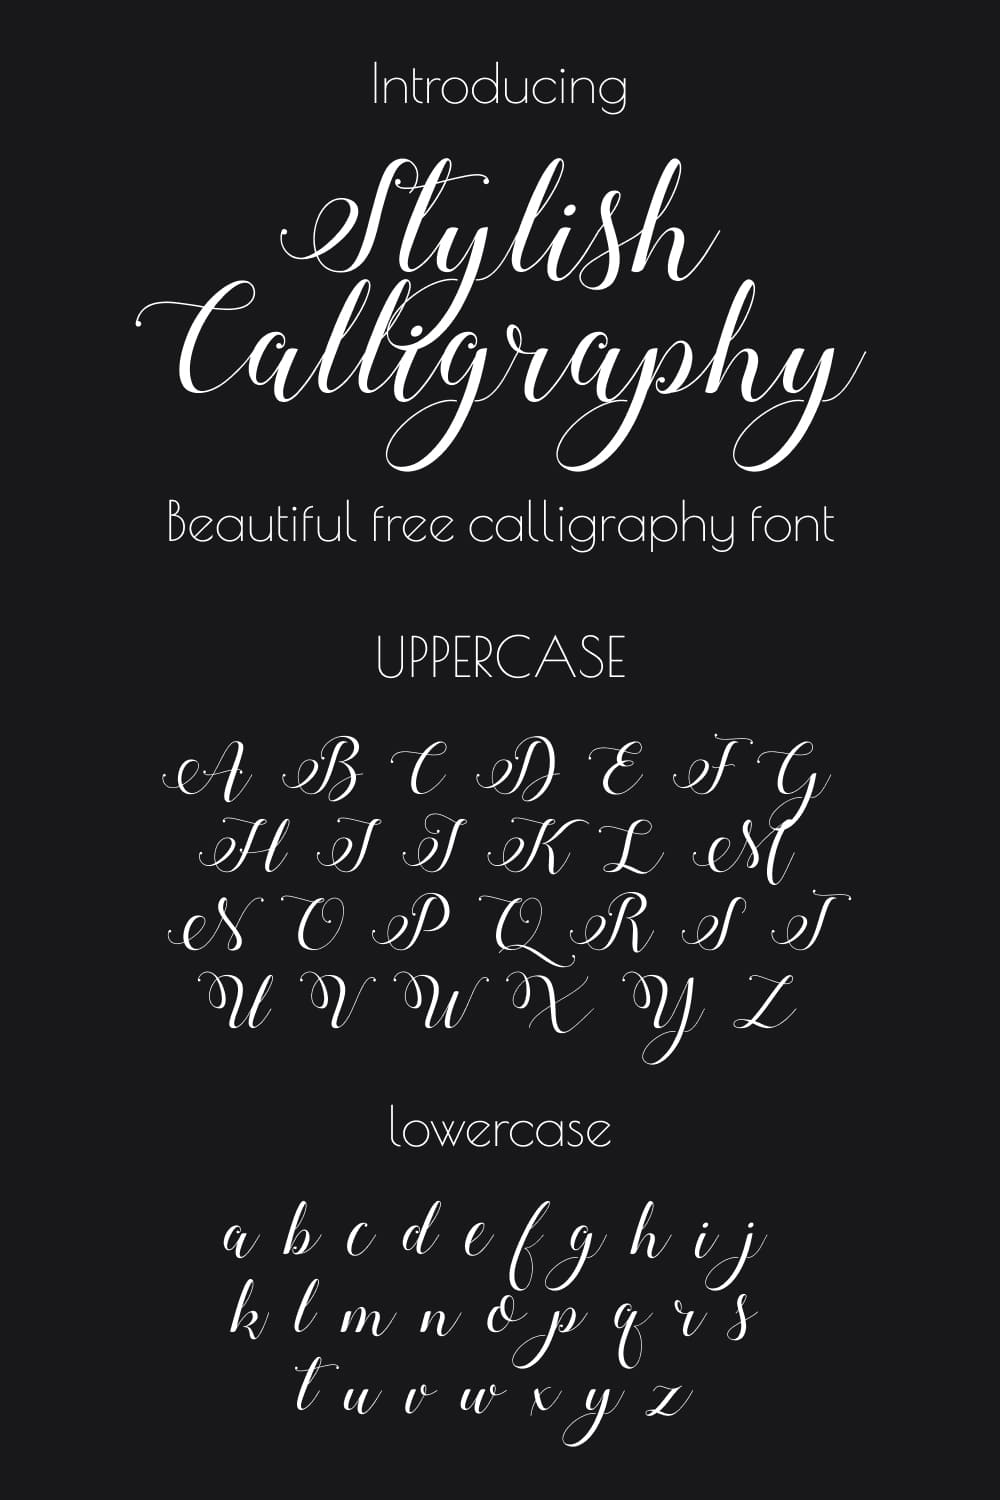 Beautiful free calligraphy font Alphabet example preview for Pinterest.